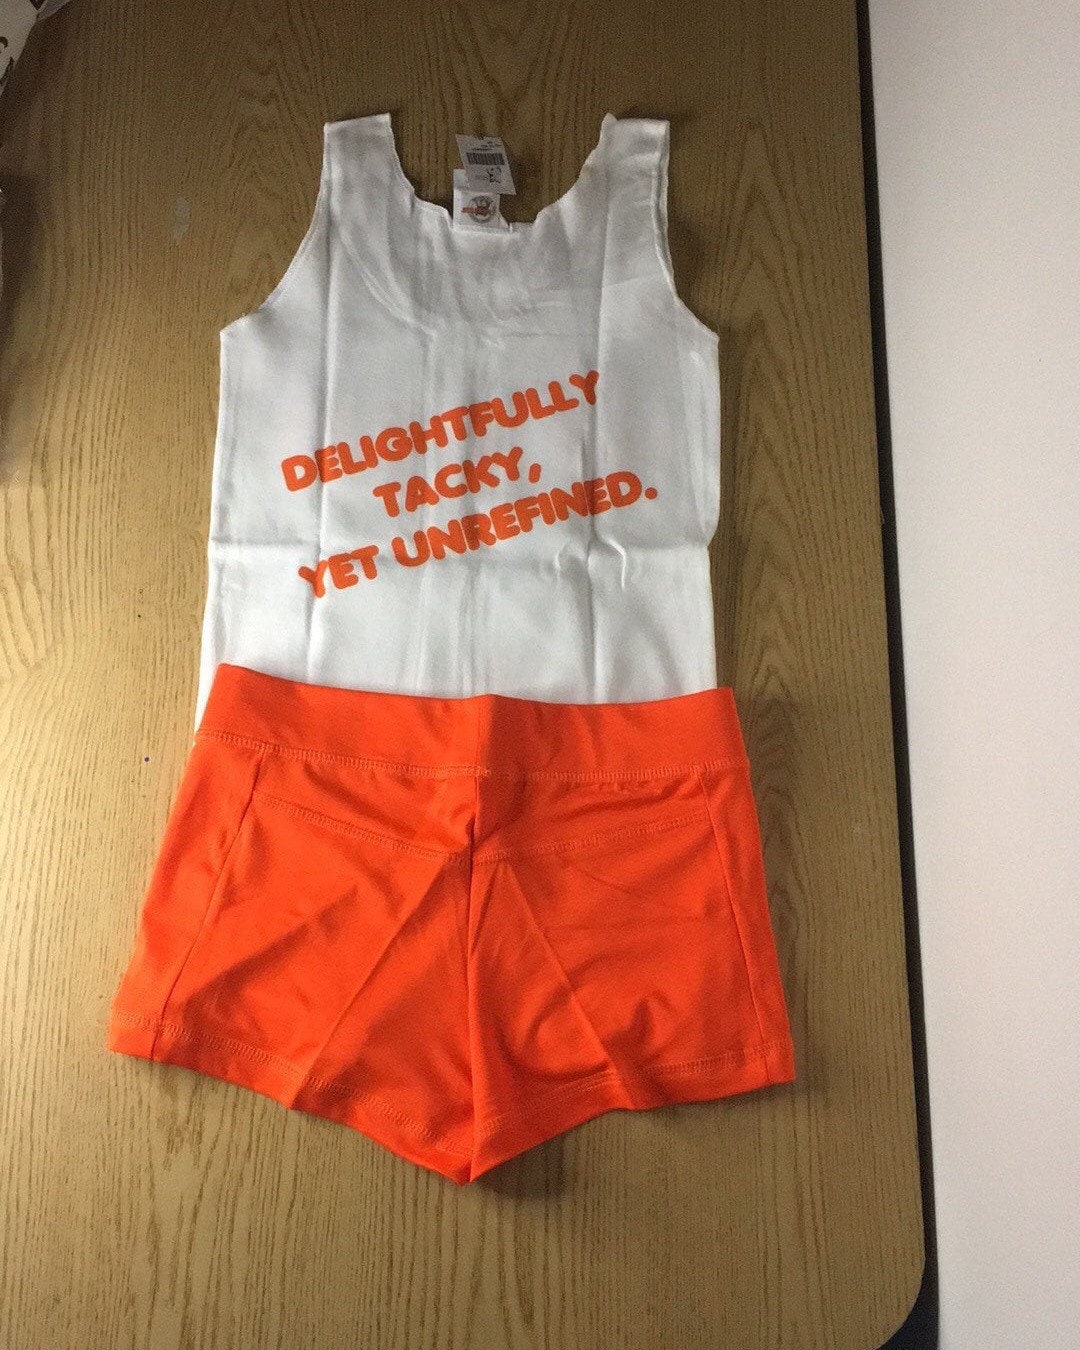 New Hooters Girl Uniform Tank Shorts and Money Pouch From Florida Large -   Canada